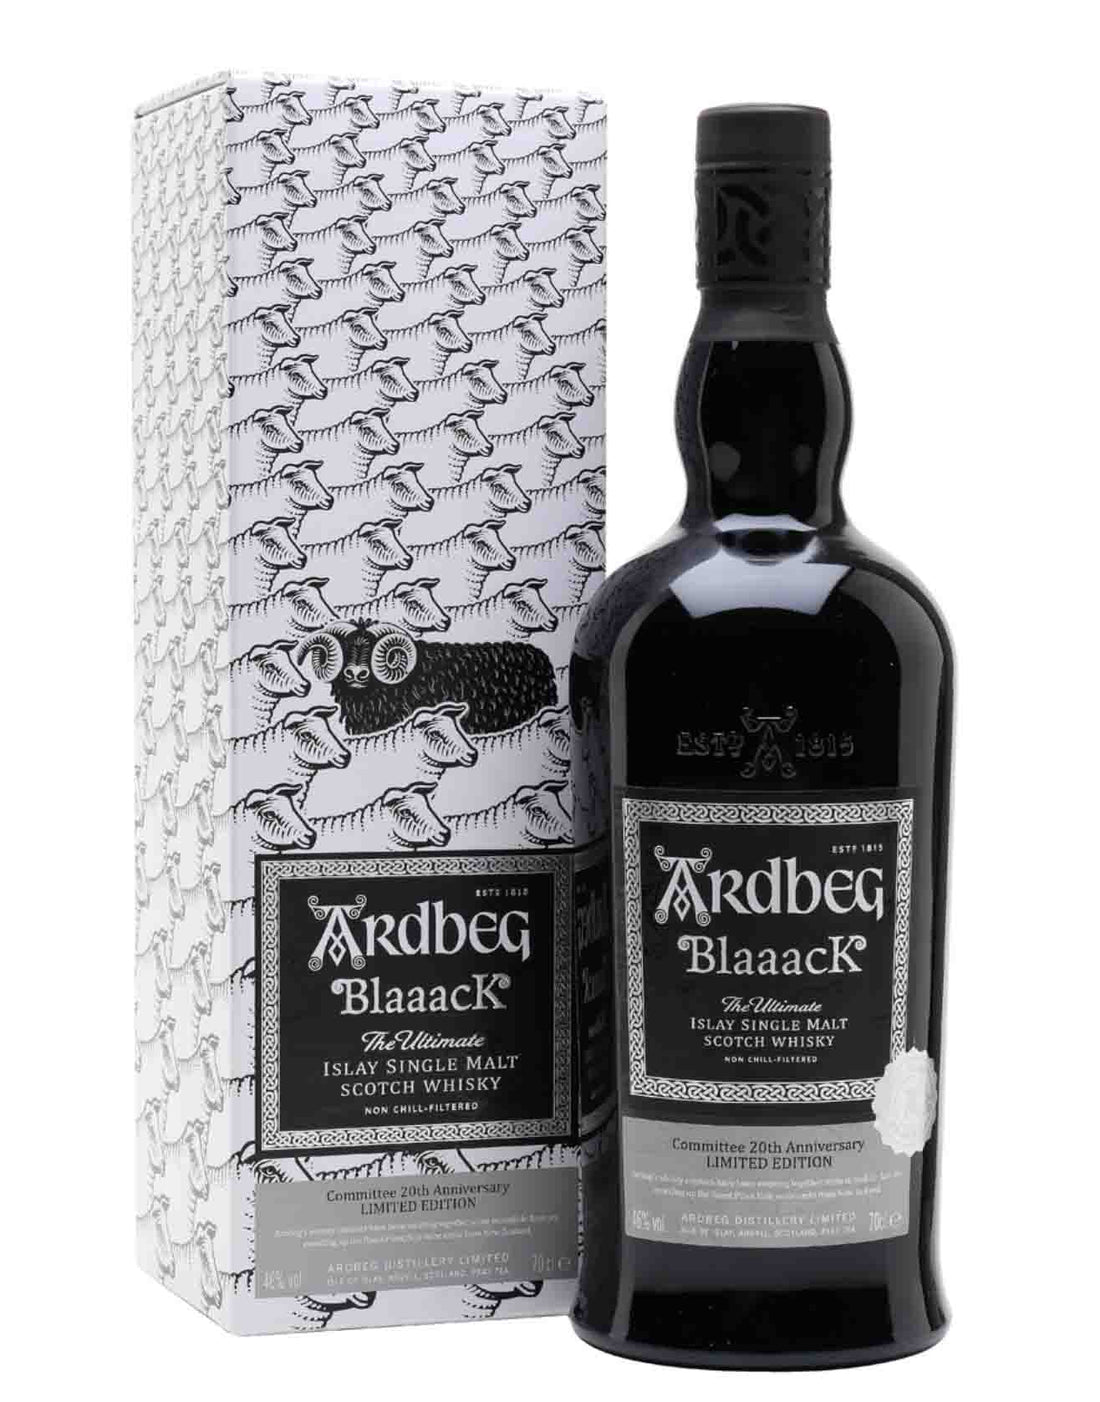 Ardbeg Blaaack Limited Edition Review